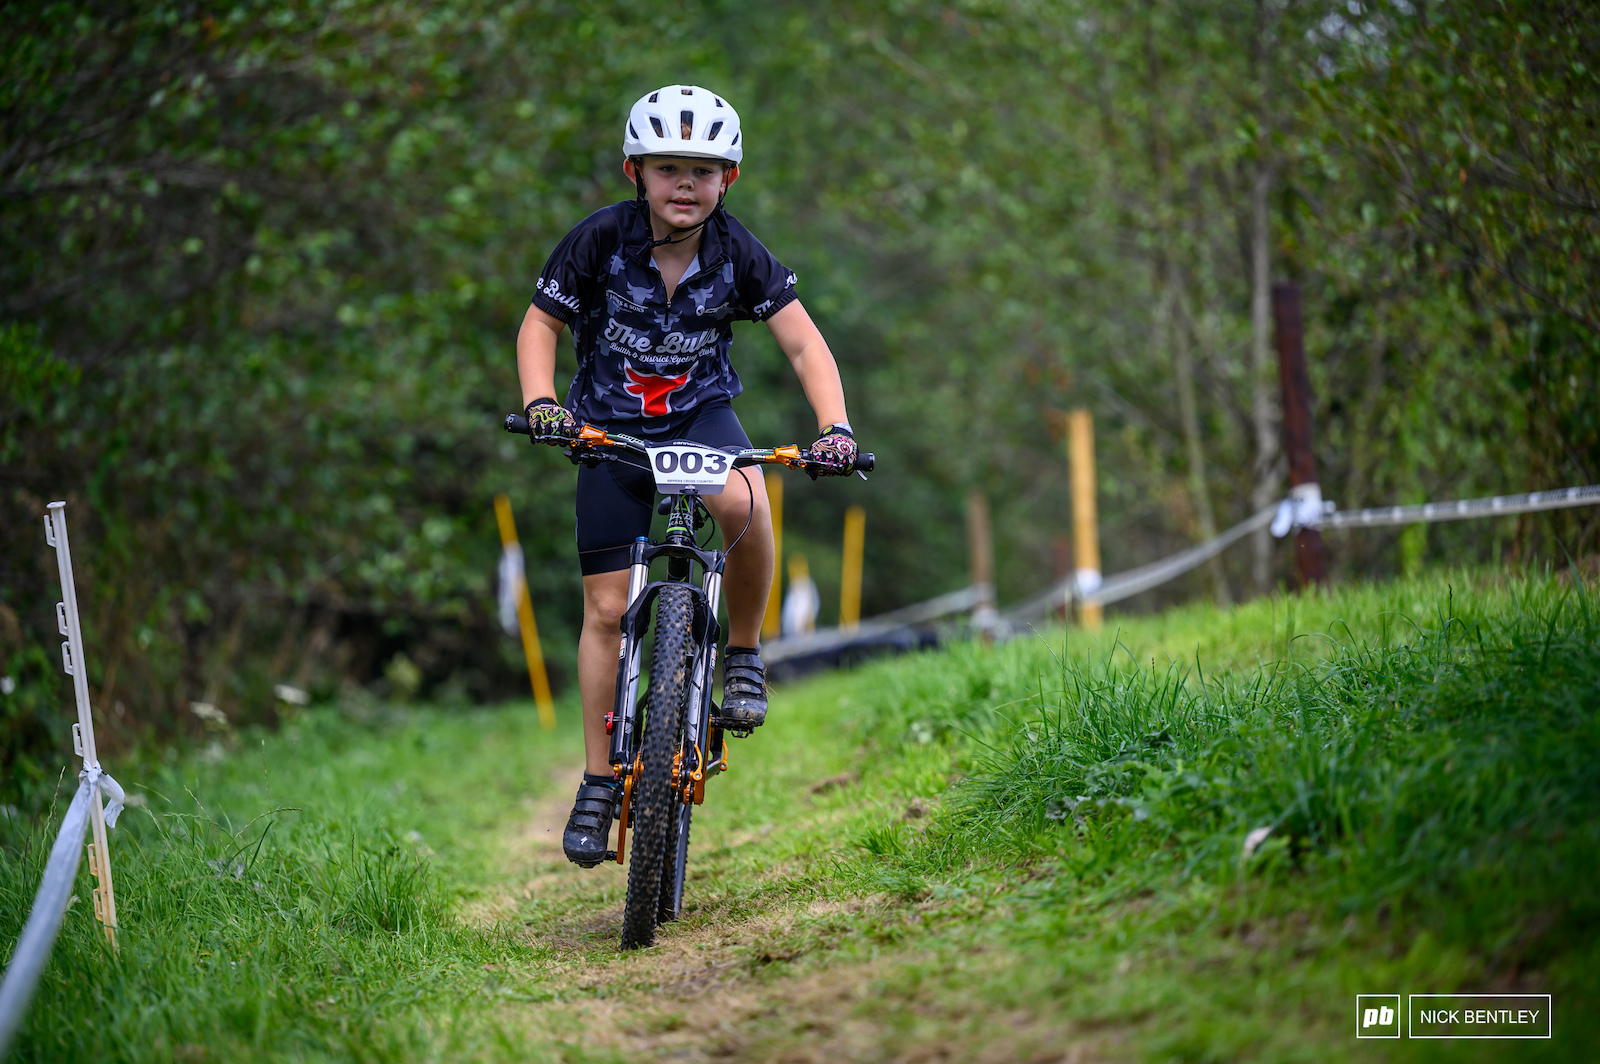 The XC race took place over 15 minutes with riders completing as many laps as they could. This rider took first place and had a clear lead ahead of his competitors